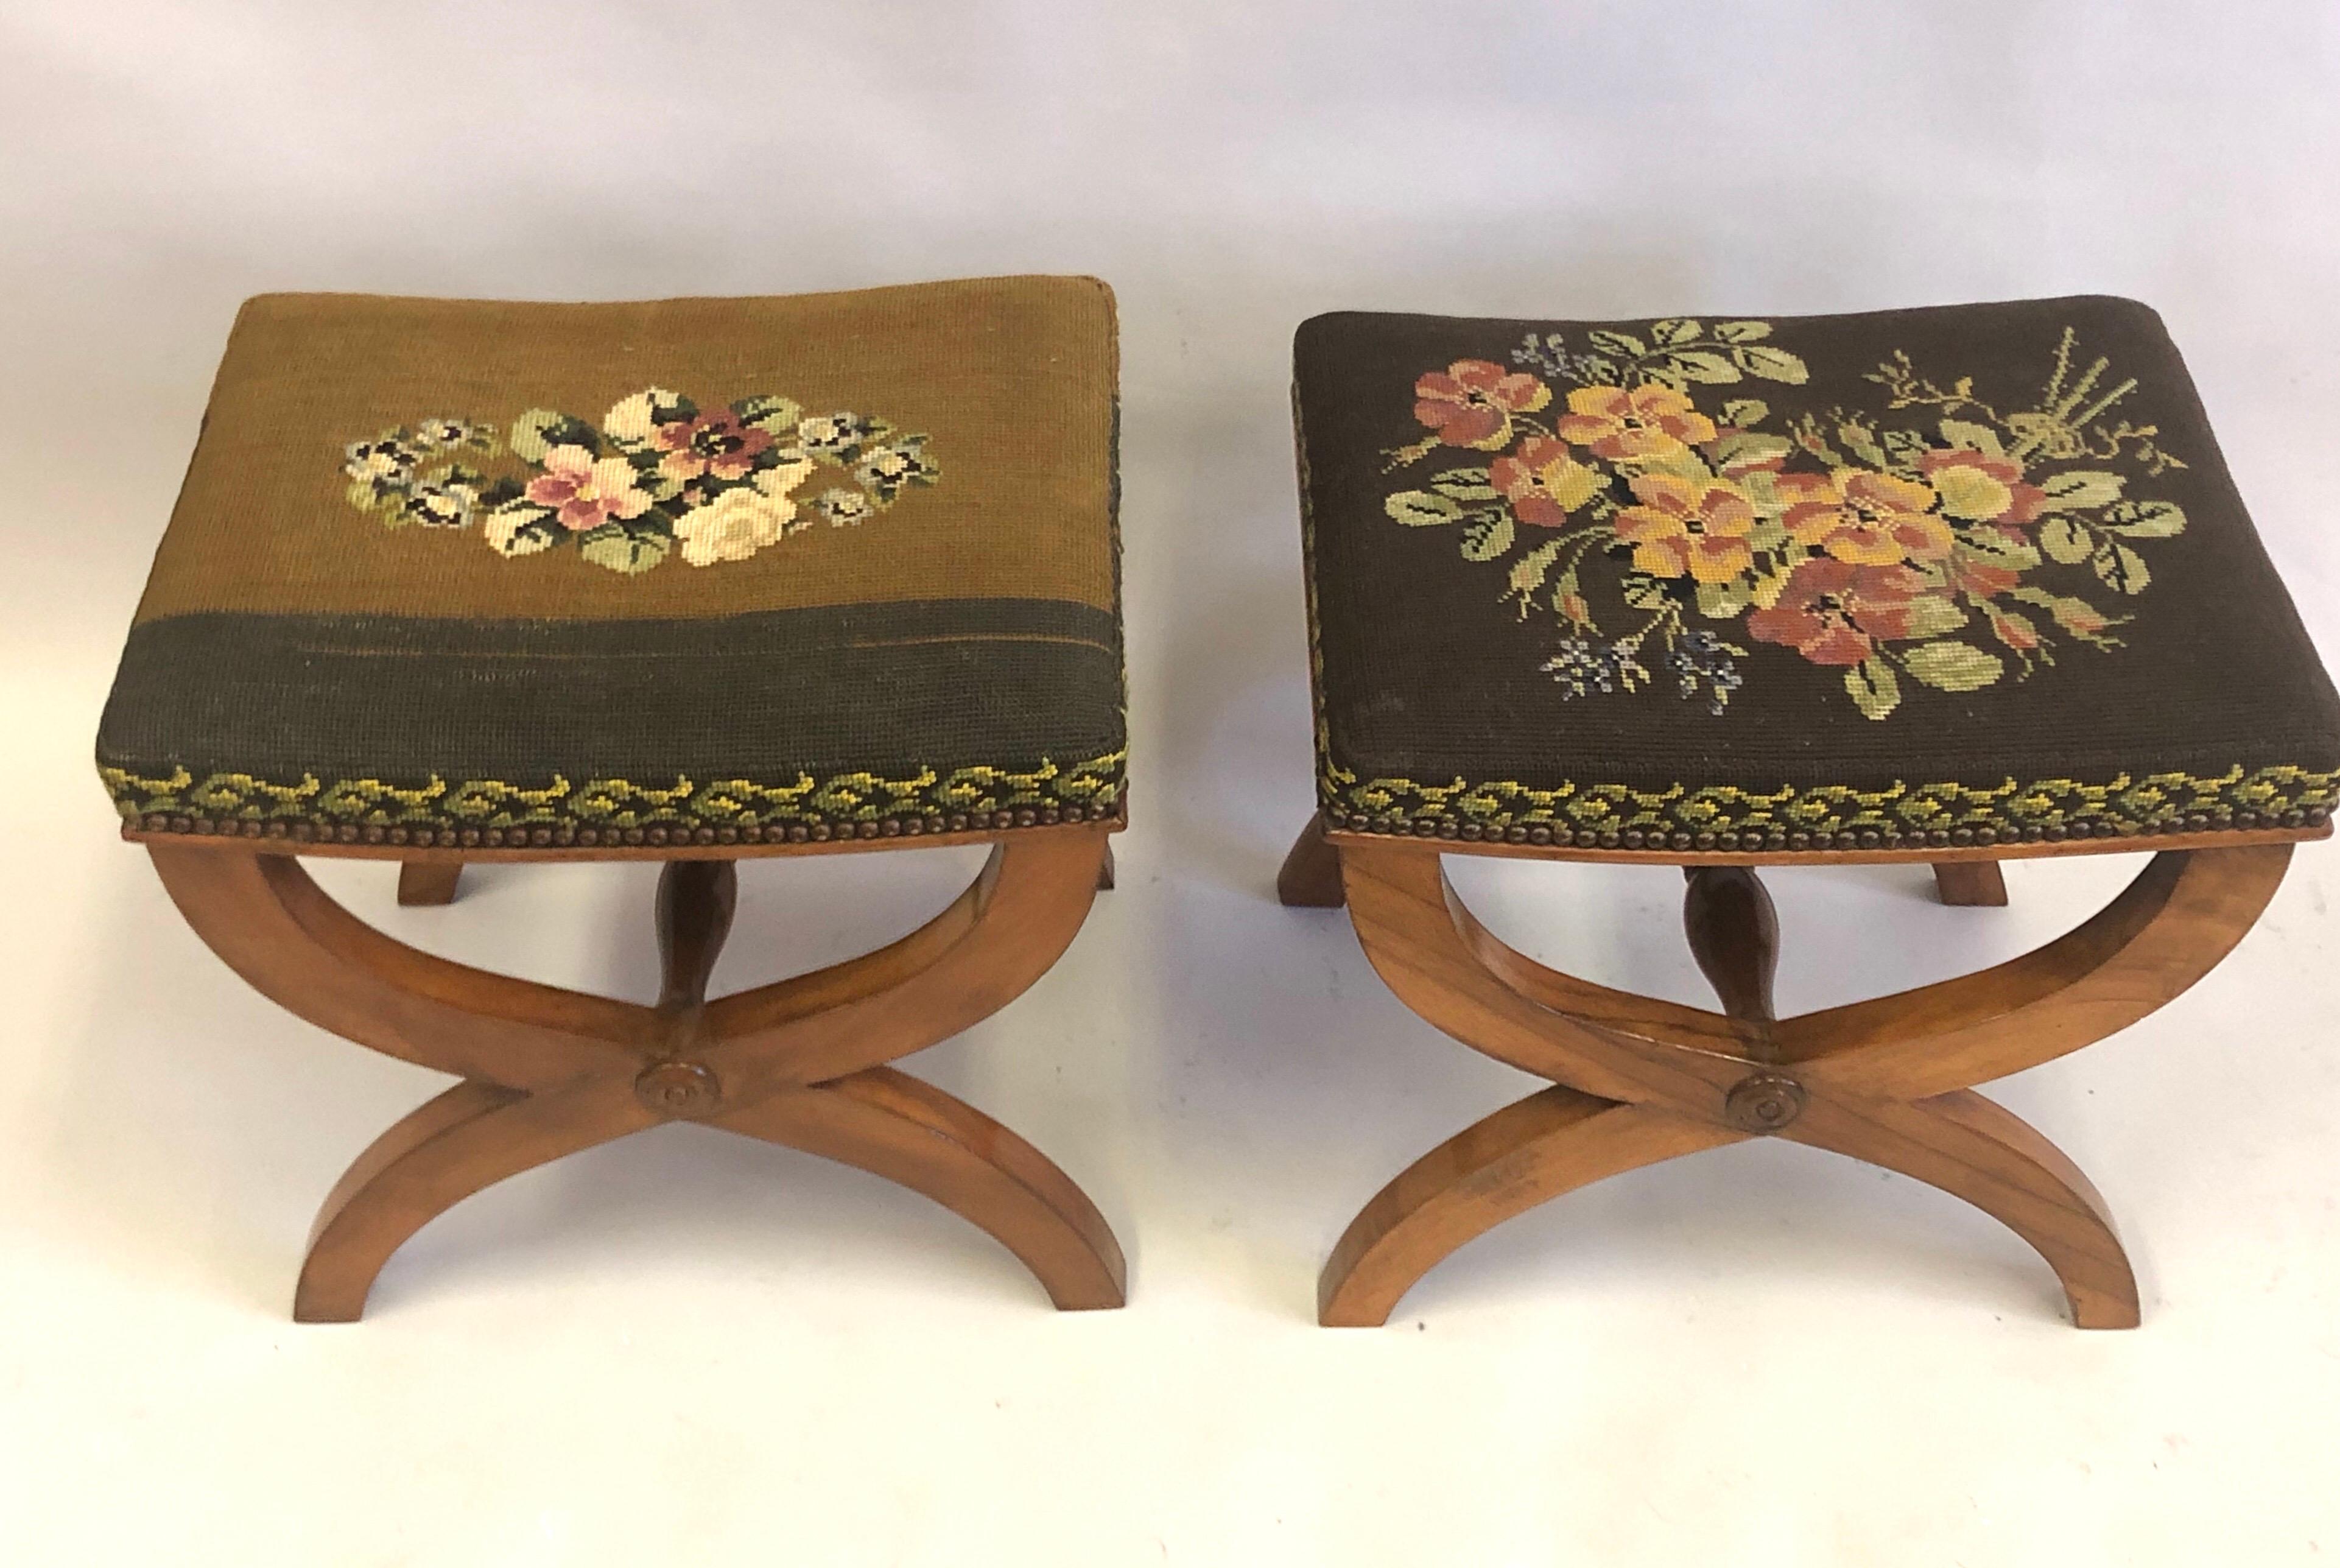 20th Century Pair of French Modern Neoclassical Stools / Benches Attributed to Andre Arbus For Sale